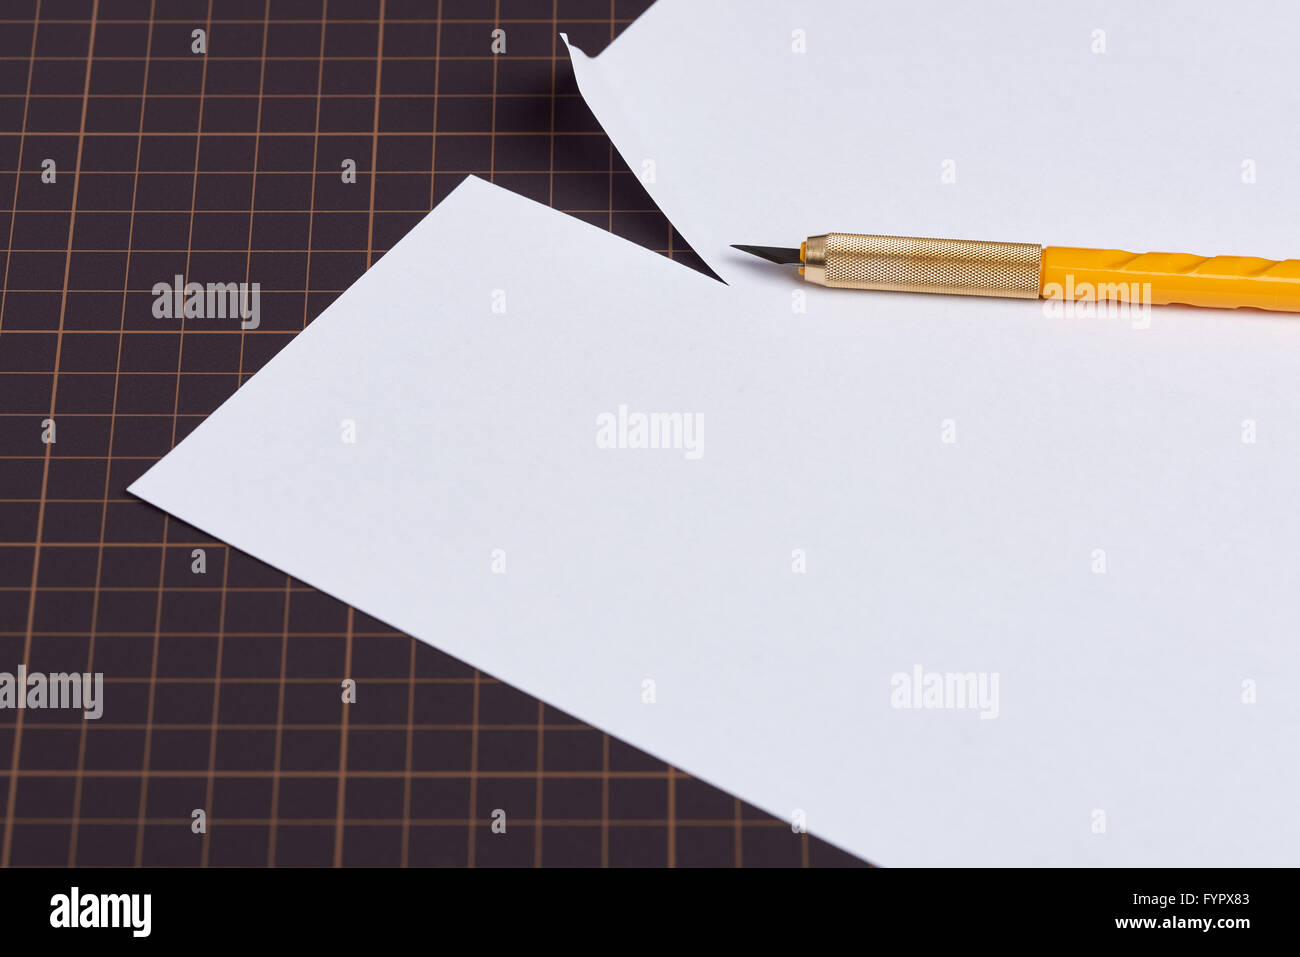 A piece of white paper that has been cut sitting on a cutting mat with a utility knife with a yellow handle on top of it. Stock Photo